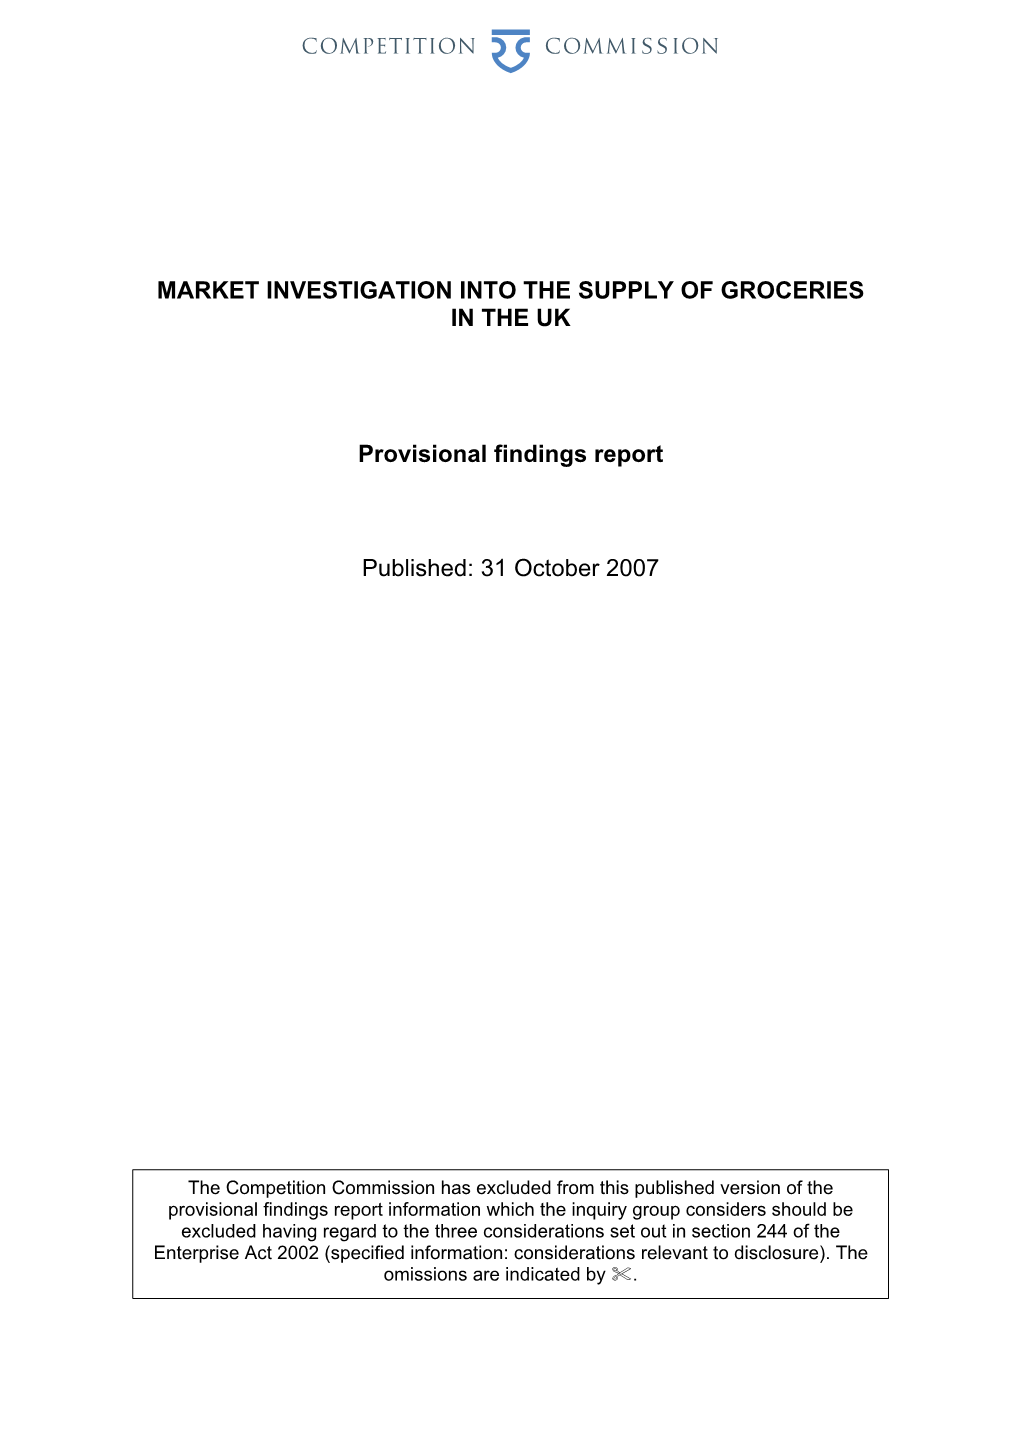 Grocery Market Inquiry: Provisional Findings Report